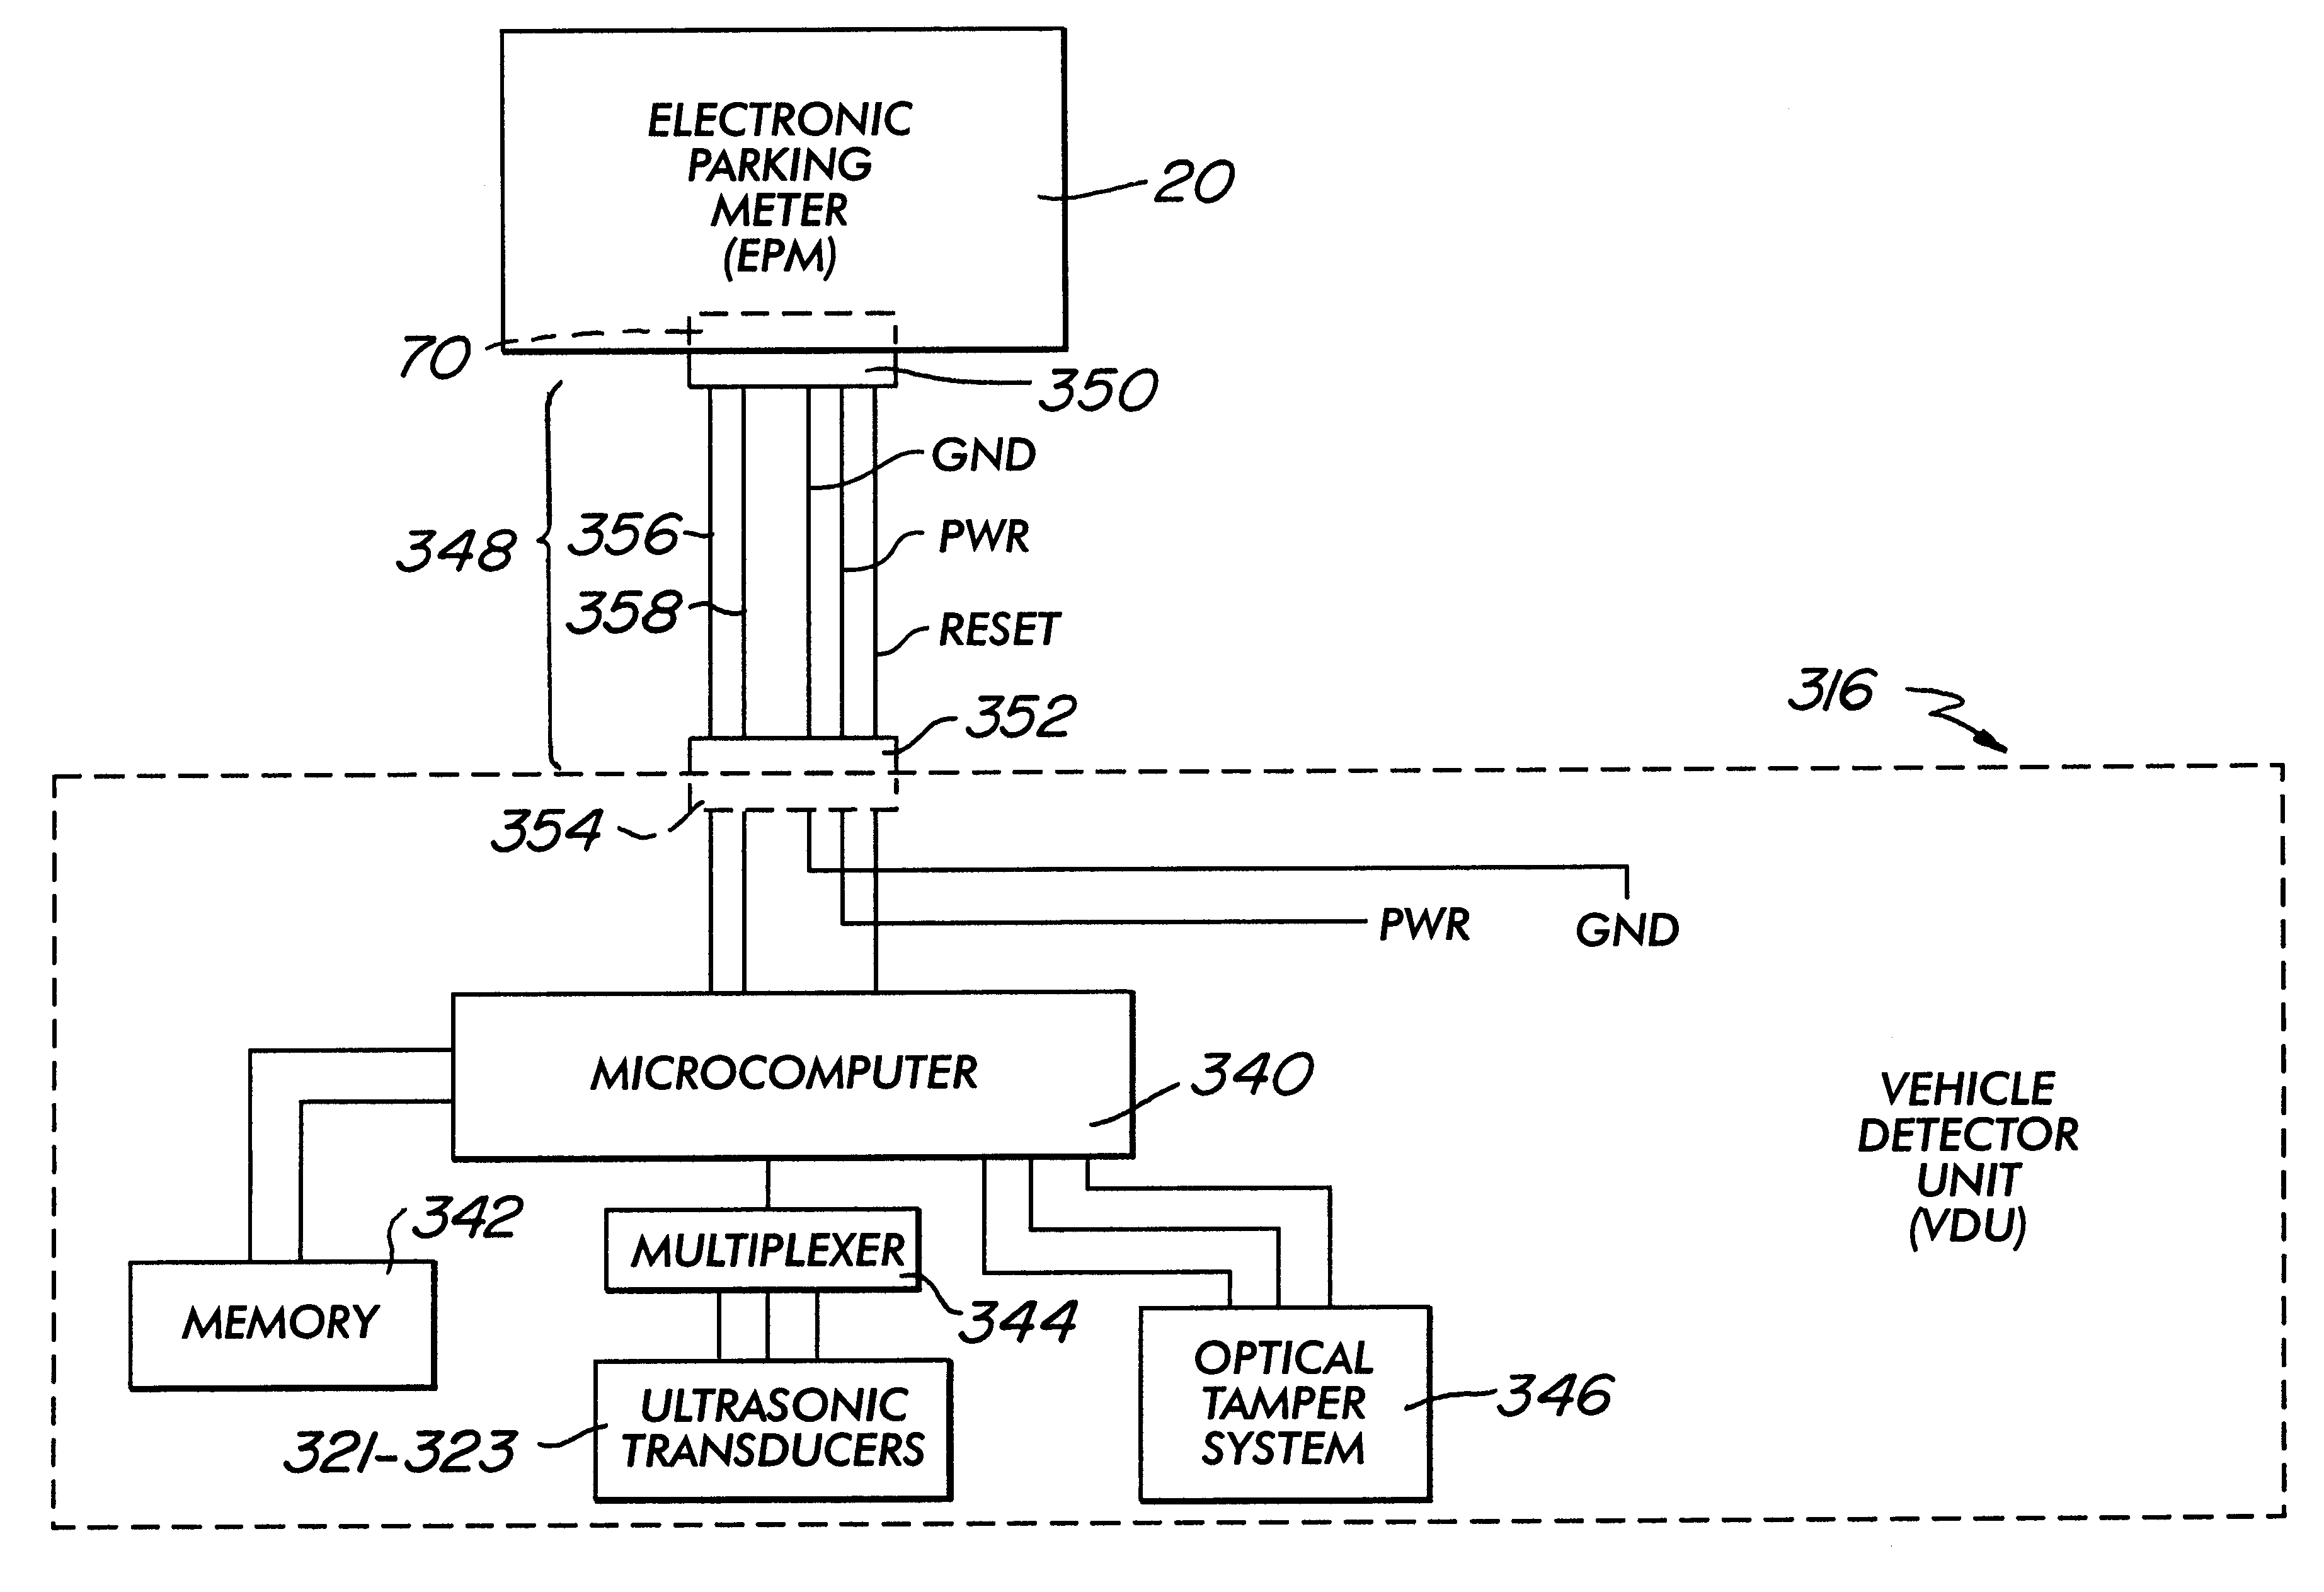 Vehicle-detecting unit for use with electronic parking meter